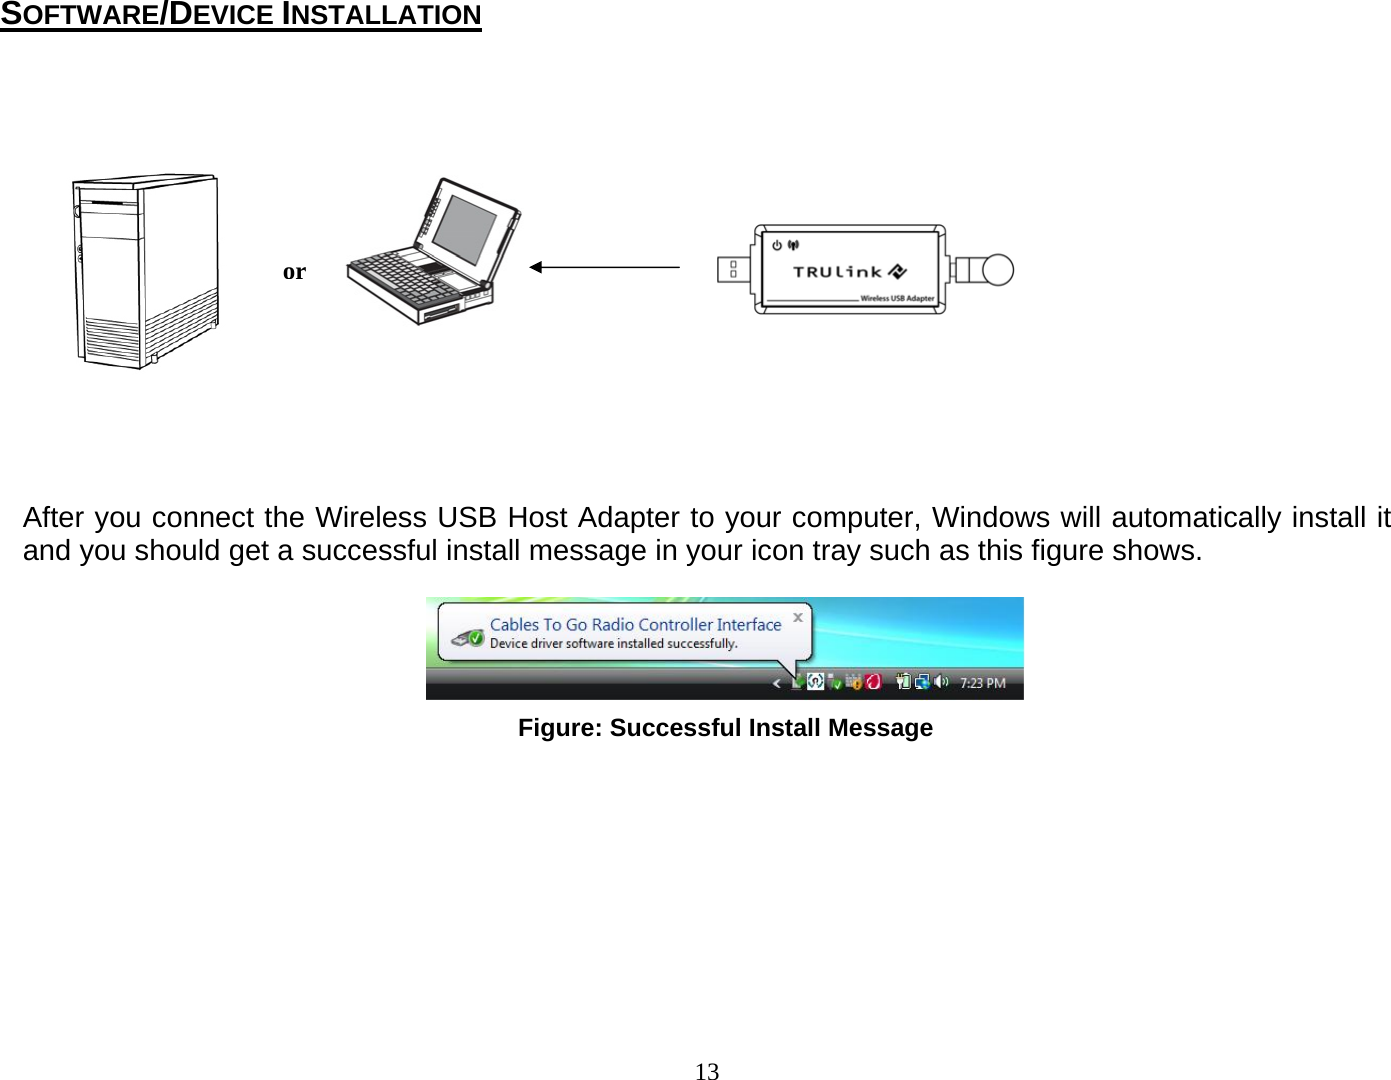 13             After you connect the Wireless USB Host Adapter to your computer, Windows will automatically install it and you should get a successful install message in your icon tray such as this figure shows.                SOFTWARE/DEVICE INSTALLATION Figure: Successful Install Message or